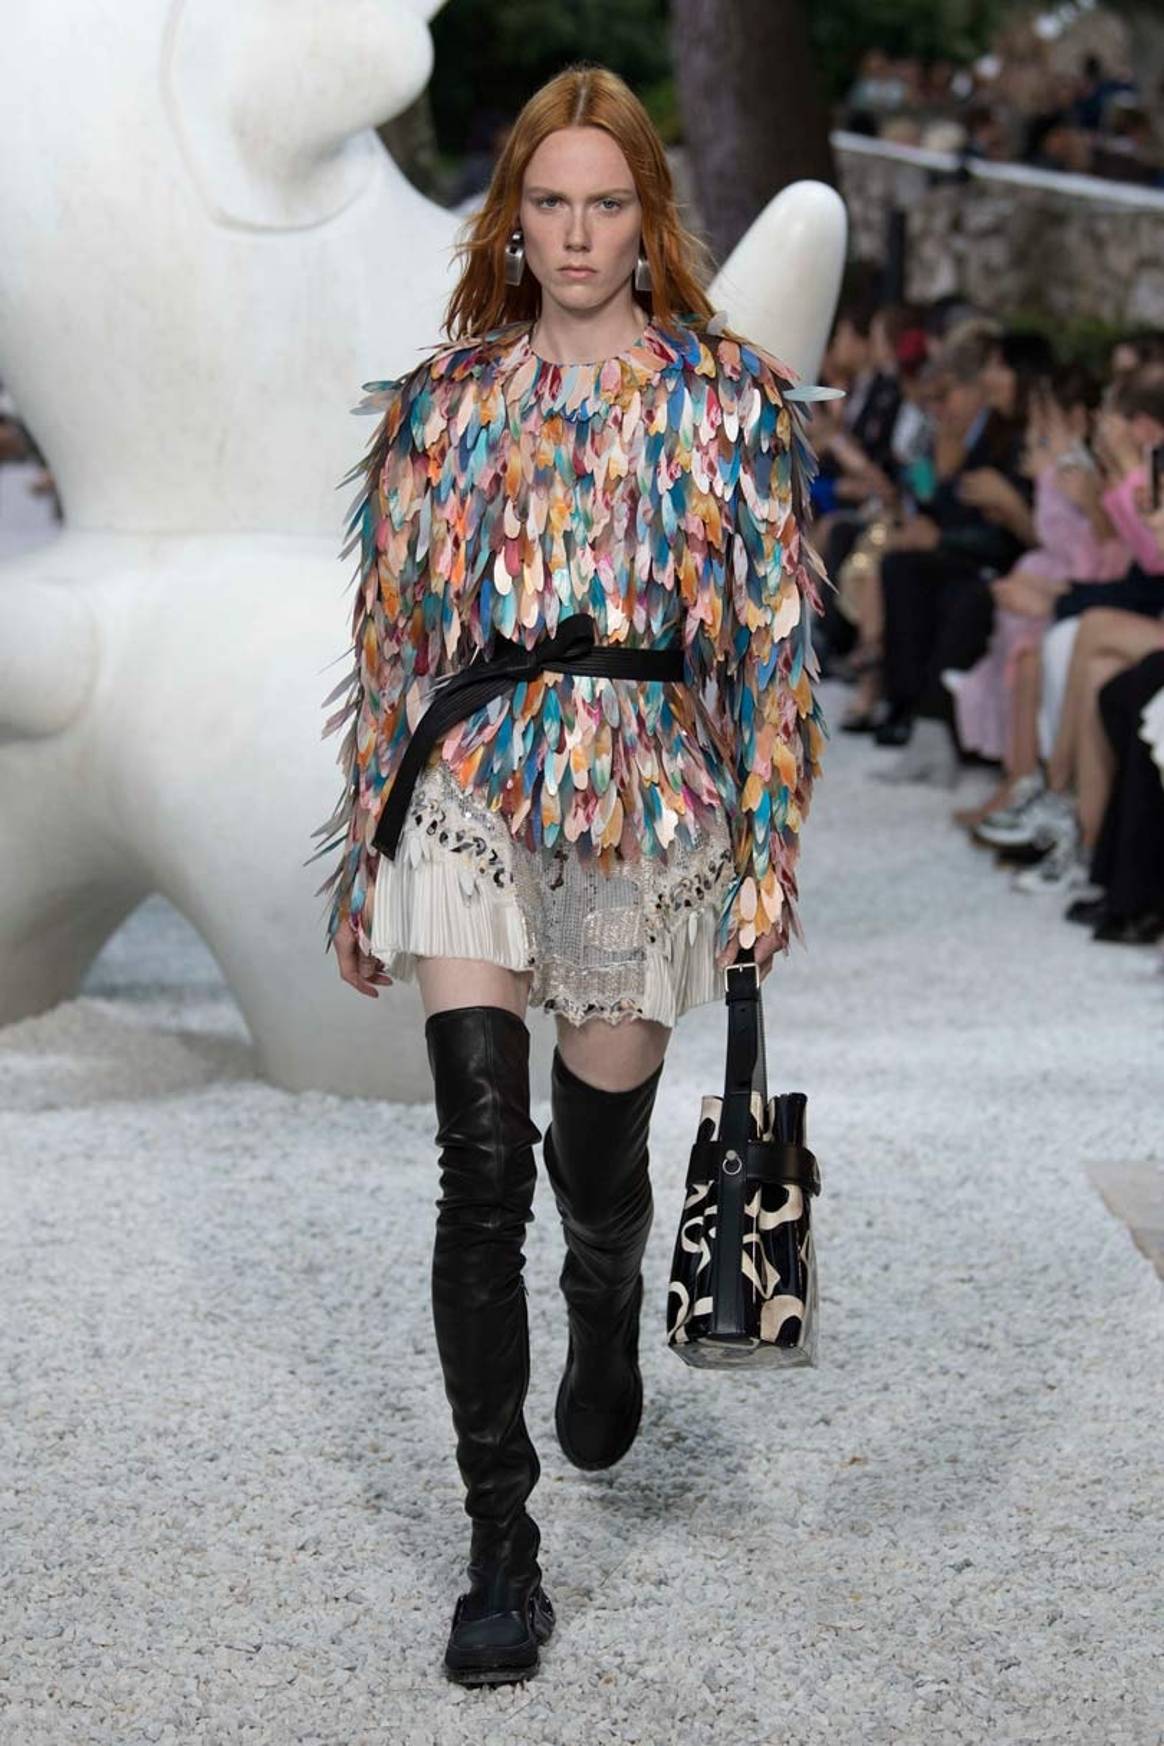 Look from the Louis Vuitton Cruise 2019 Collection, presented at